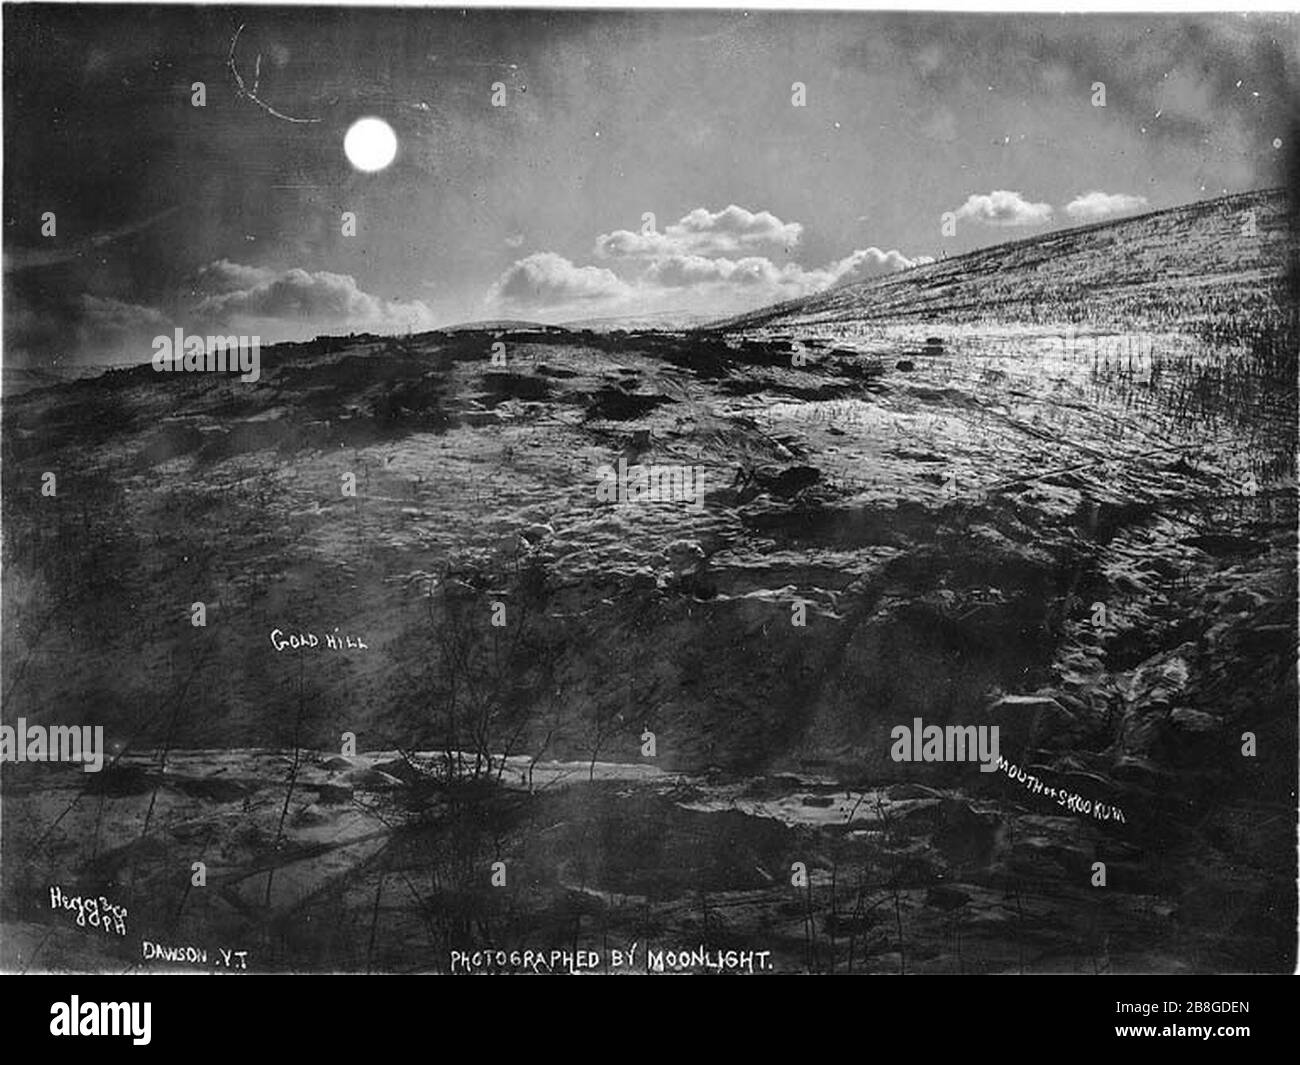 Gold Hill and mouth of Skookum Creek photographed by moonlight Yukon Territory ca 1898 Stock Photo